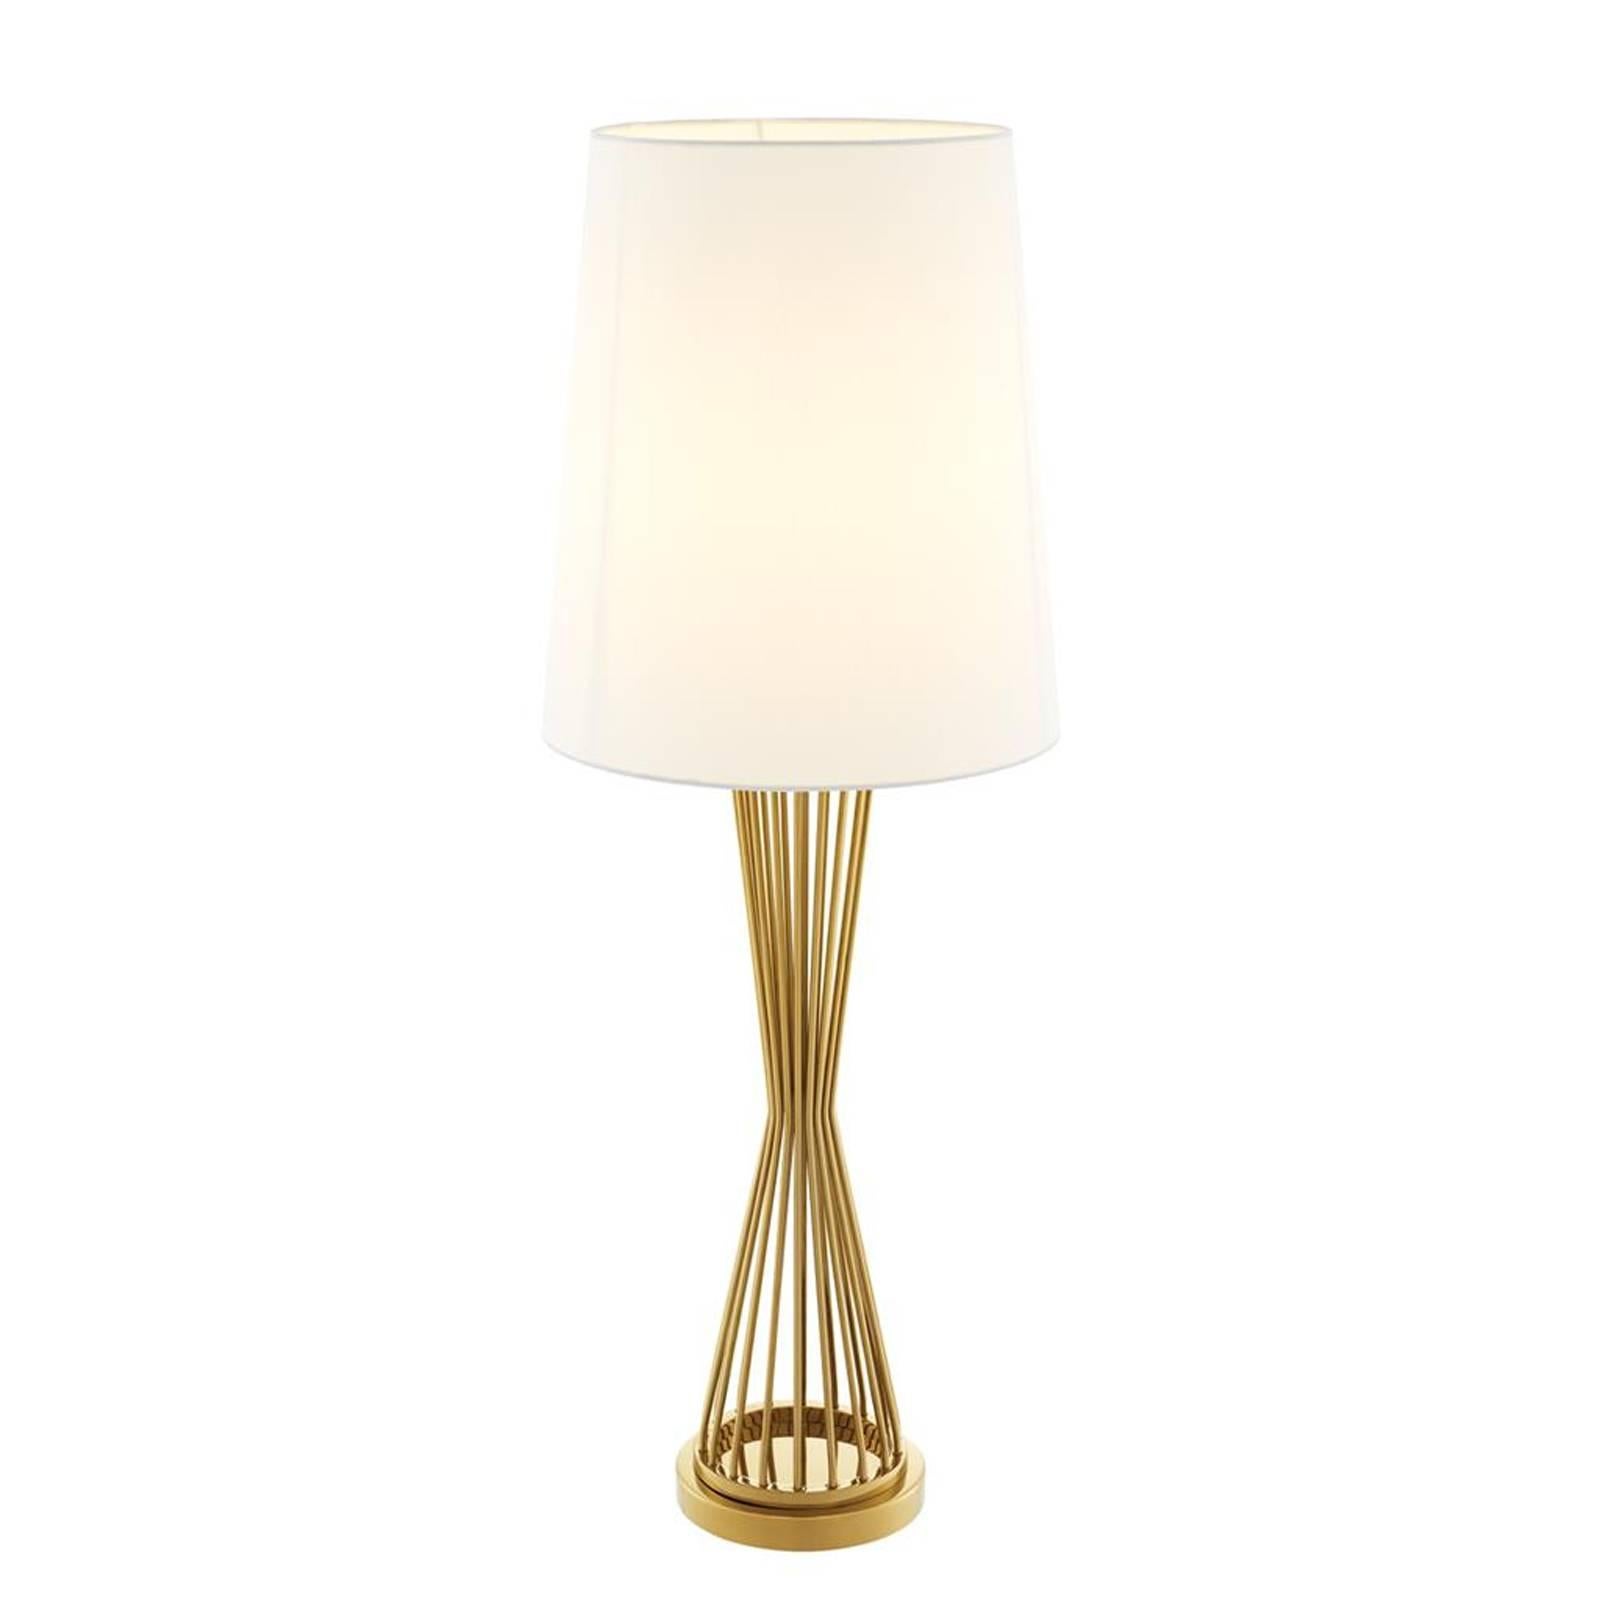 Table lamp Barnet with base in gold finish.
Off-white shade included. One bulb, lamp holder
type E27, max 40 watt. Bulb not included.
Also available in nickel finish, on request.
 